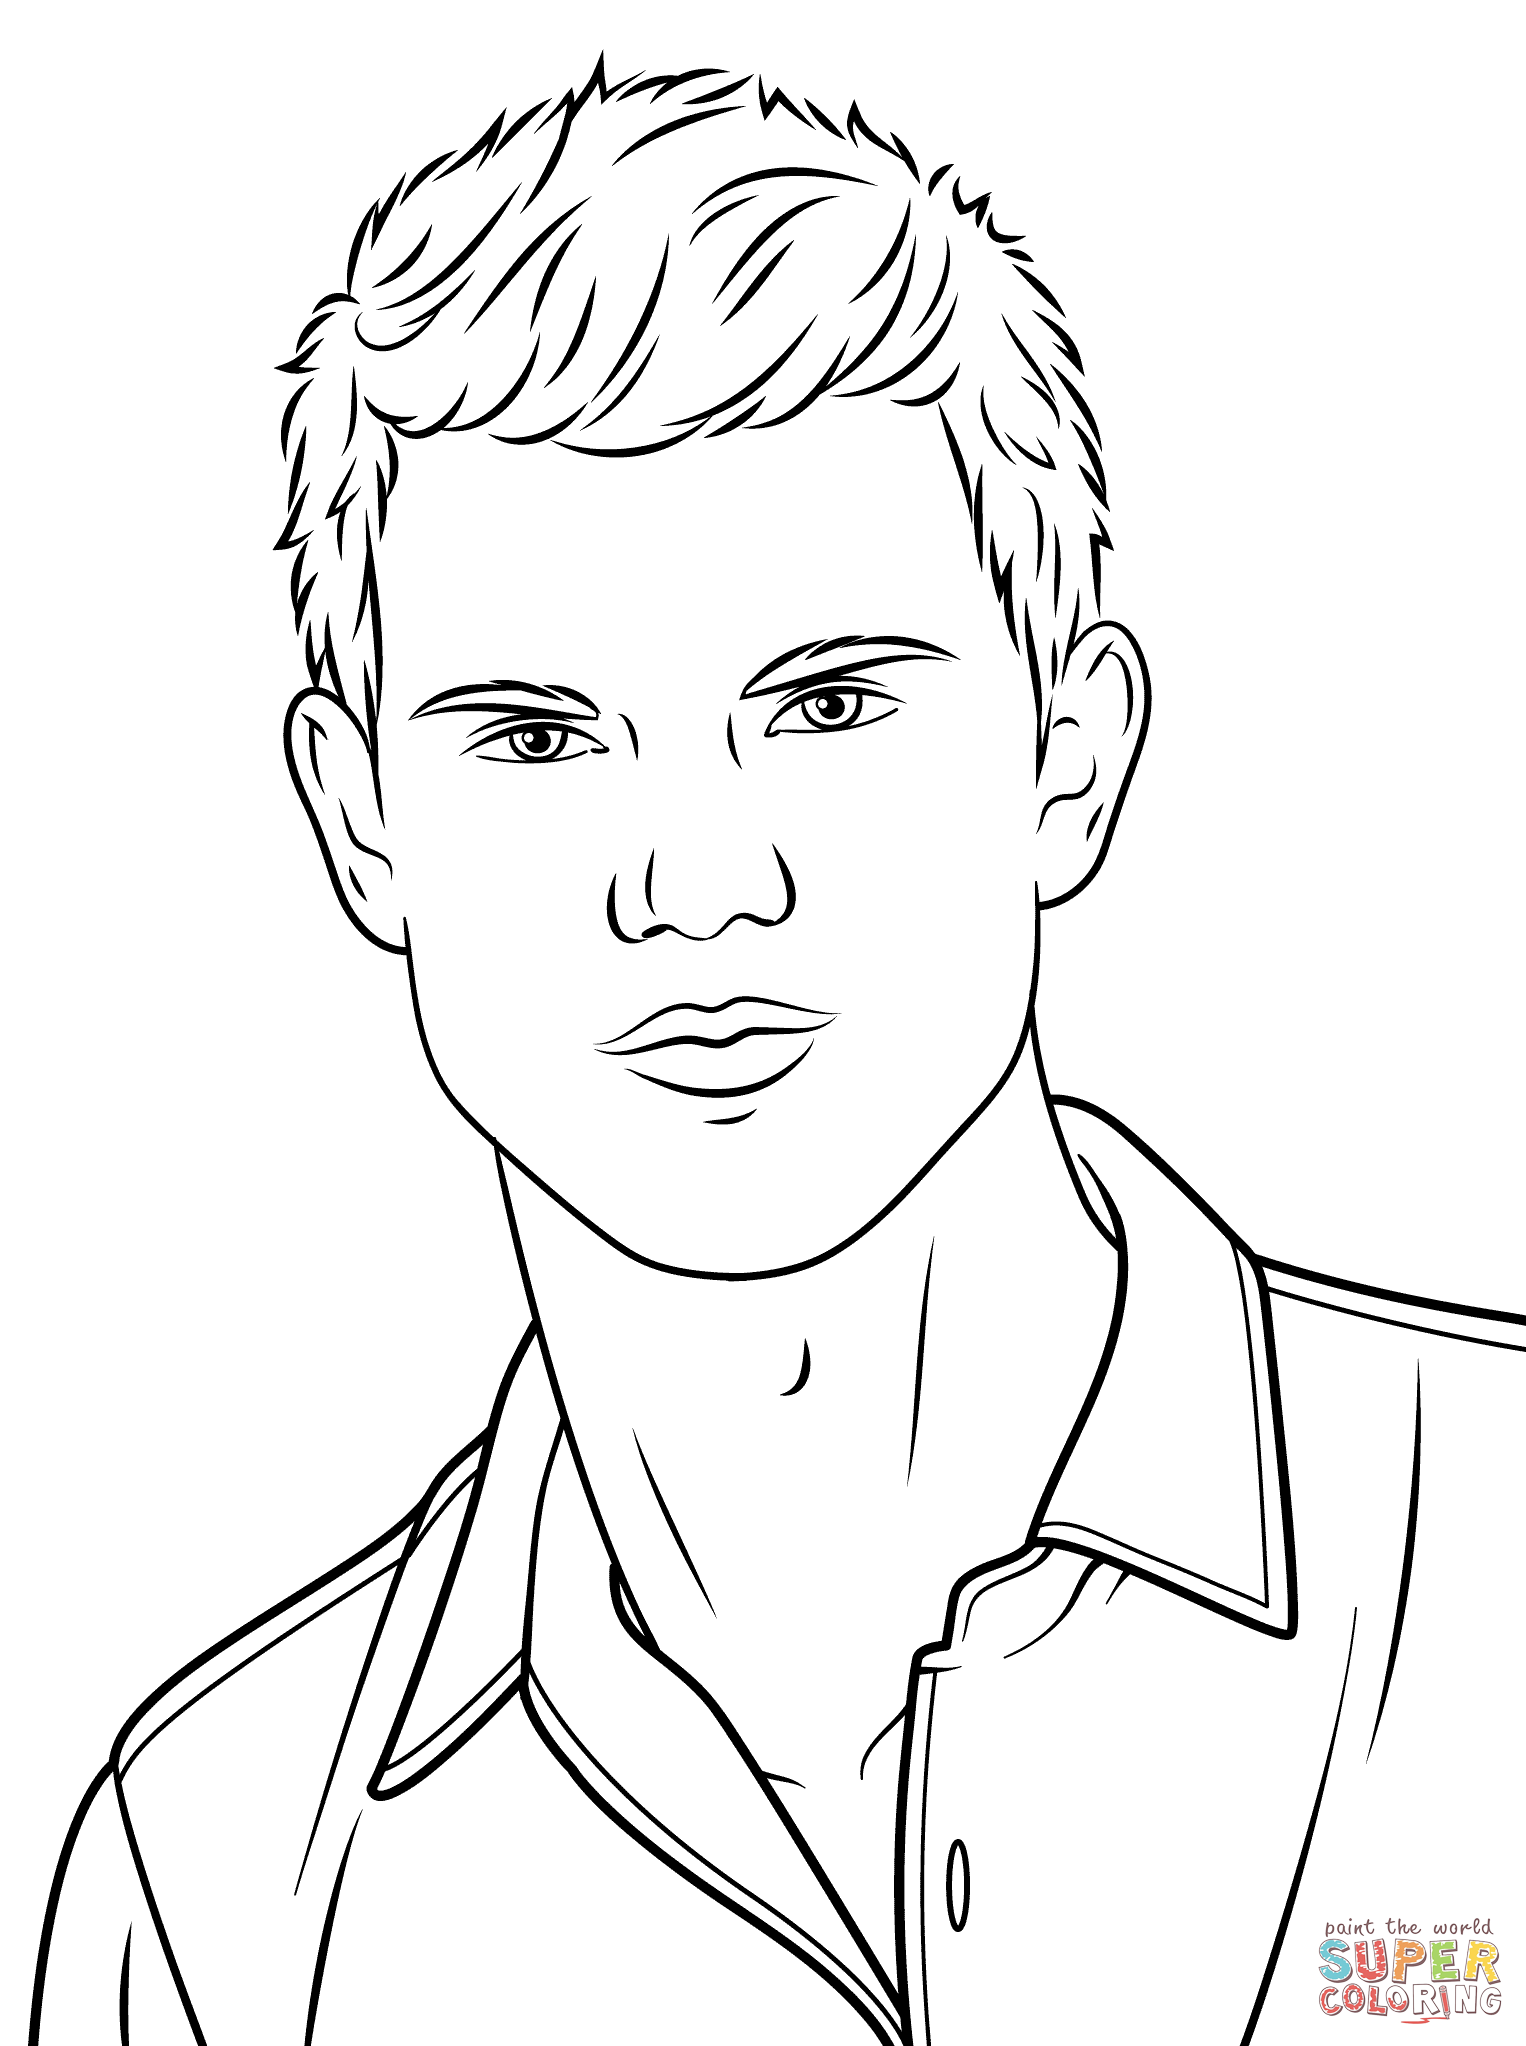 Taylor Swift coloring page | Free Printable Coloring Pages